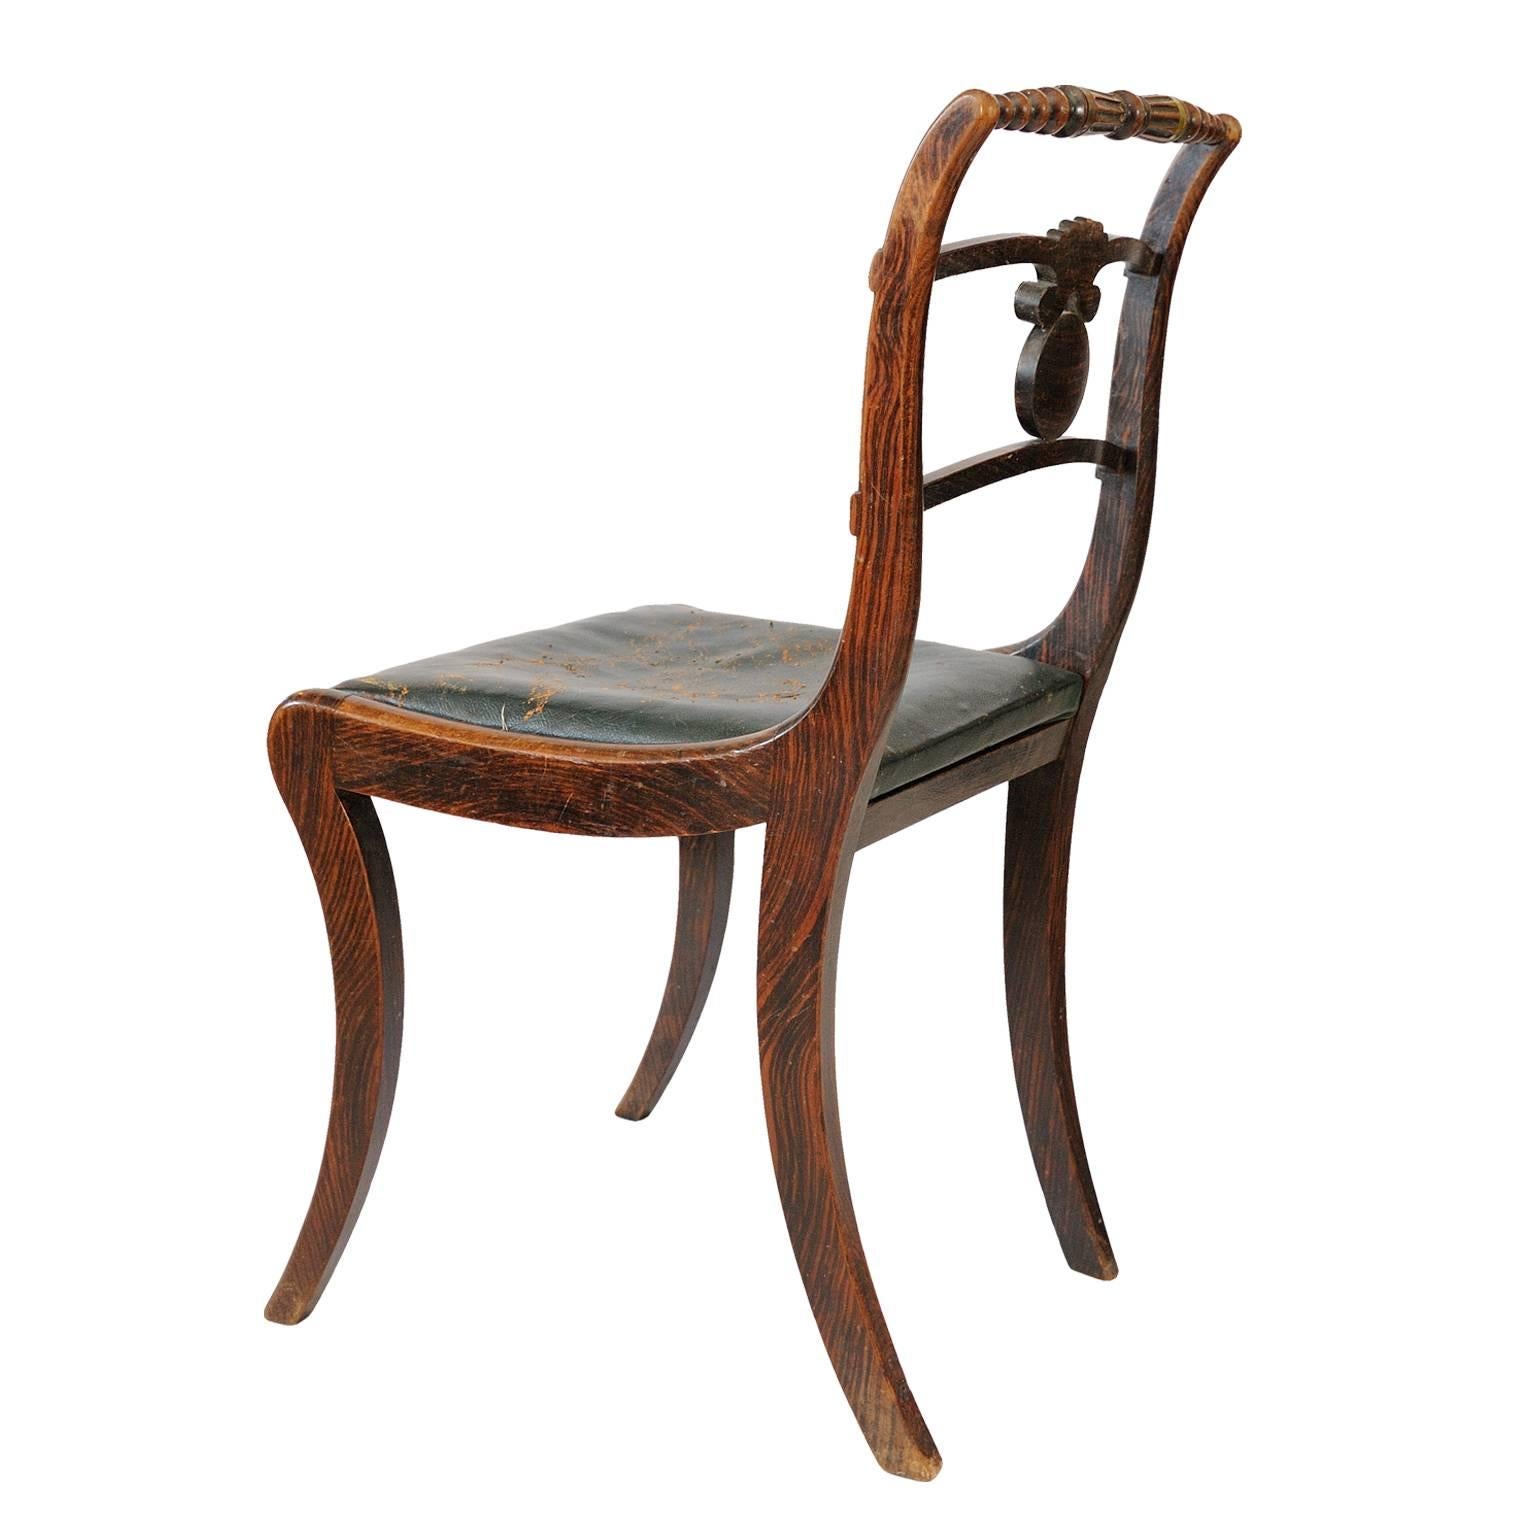 English Regency Side Chairs, circa 1810 In Good Condition For Sale In Tetbury, Gloucestershire